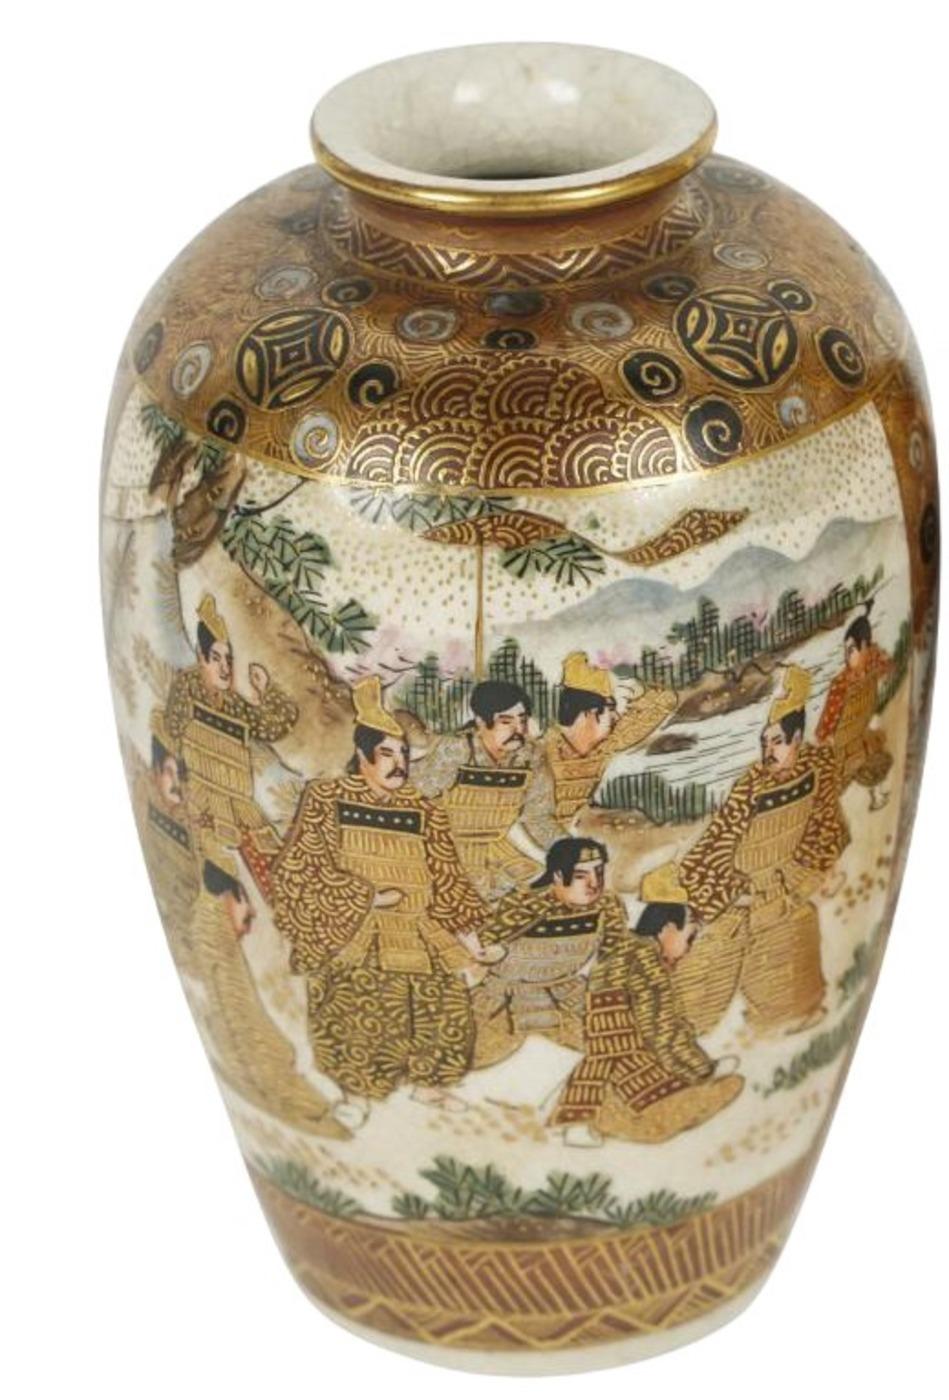 This exquisite Satsuma vase is a perfect addition to any collector's treasure trove. With panels of intricately detailed figures and a beautiful decorative lattice border, this 20th-century vase is a true work of art. Don't miss your chance to own a